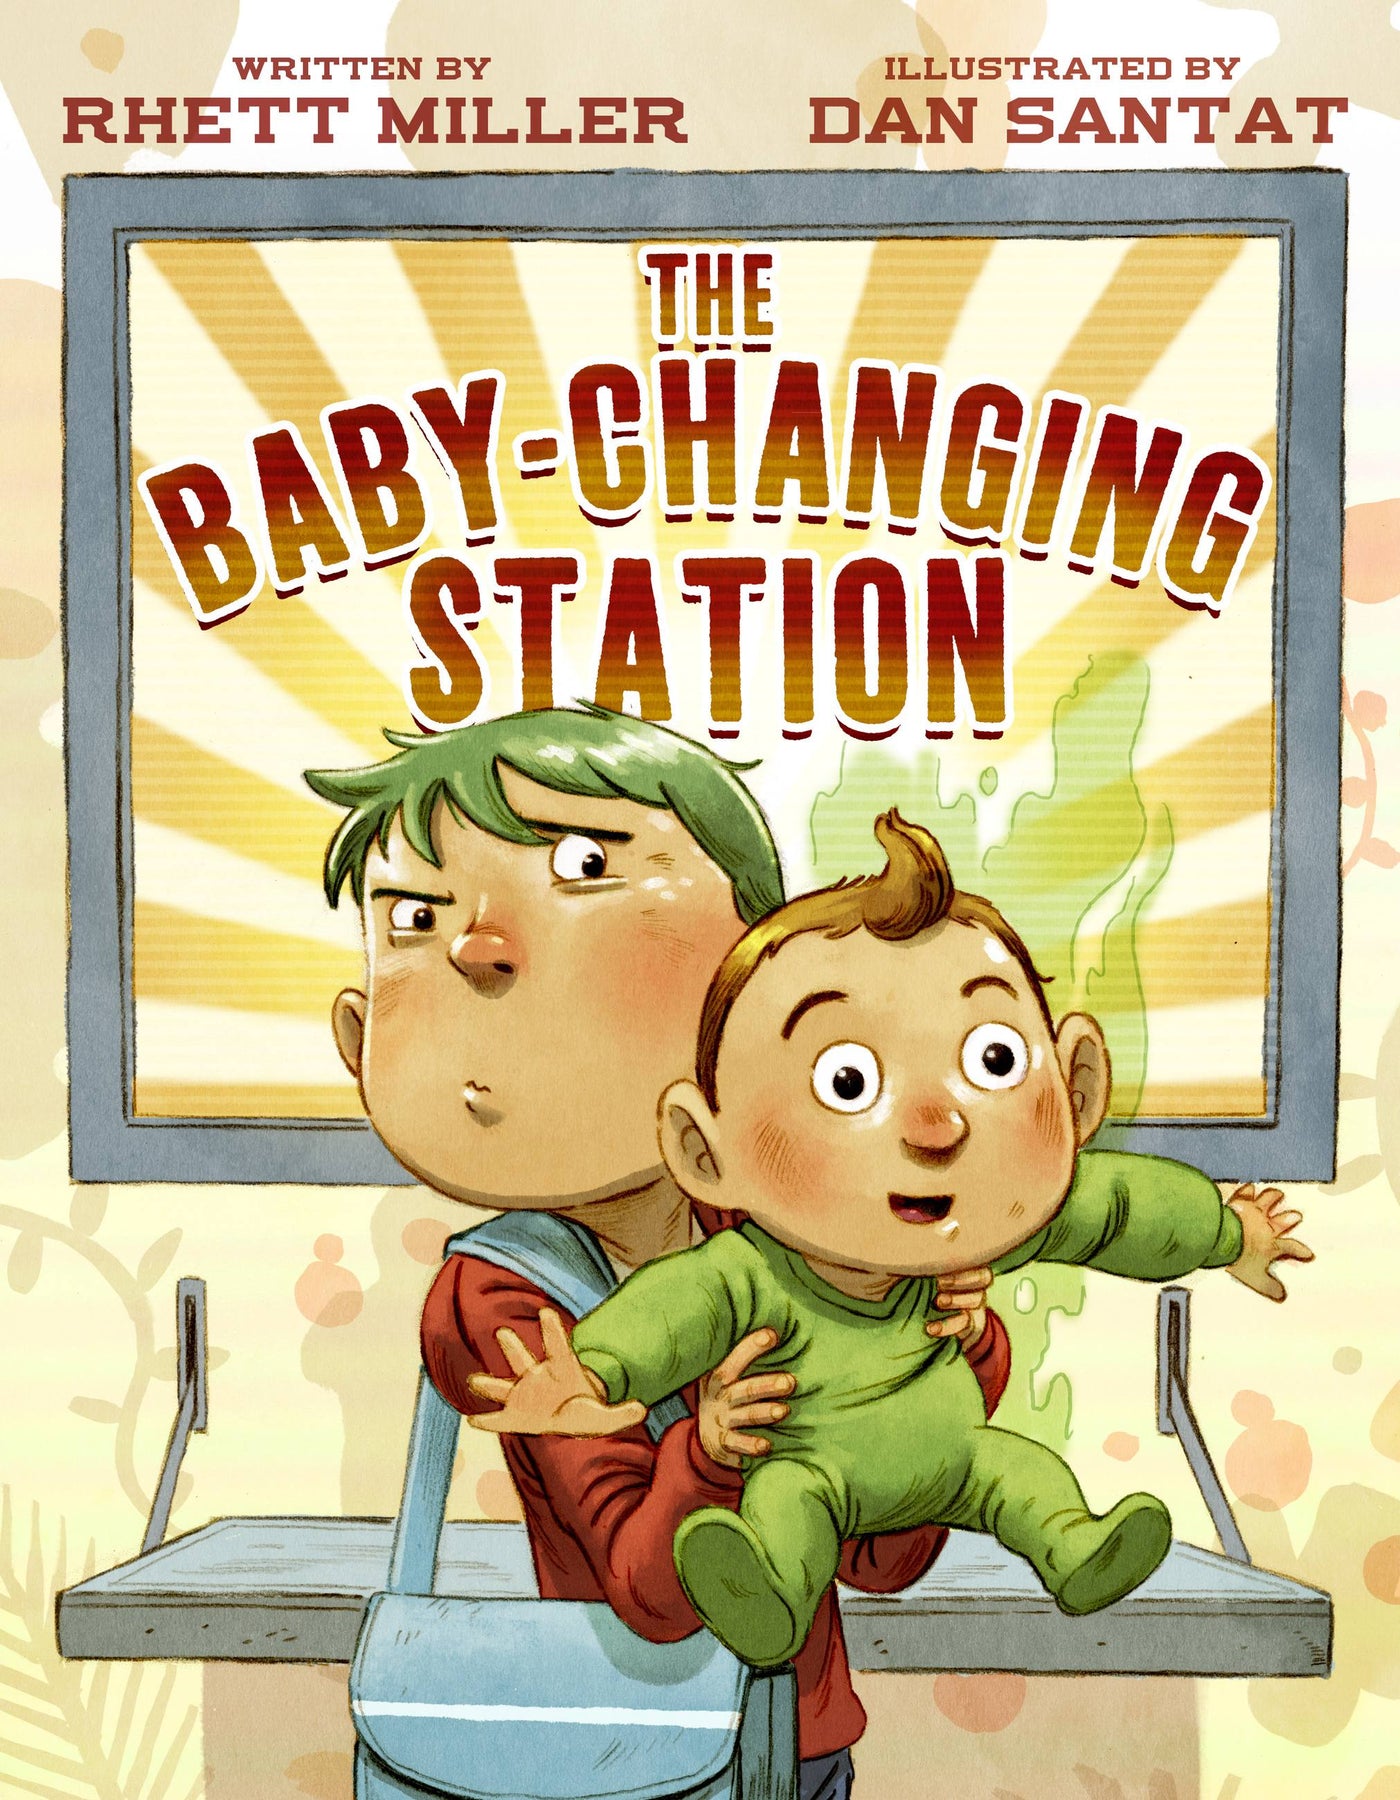 The Baby-Changing Station